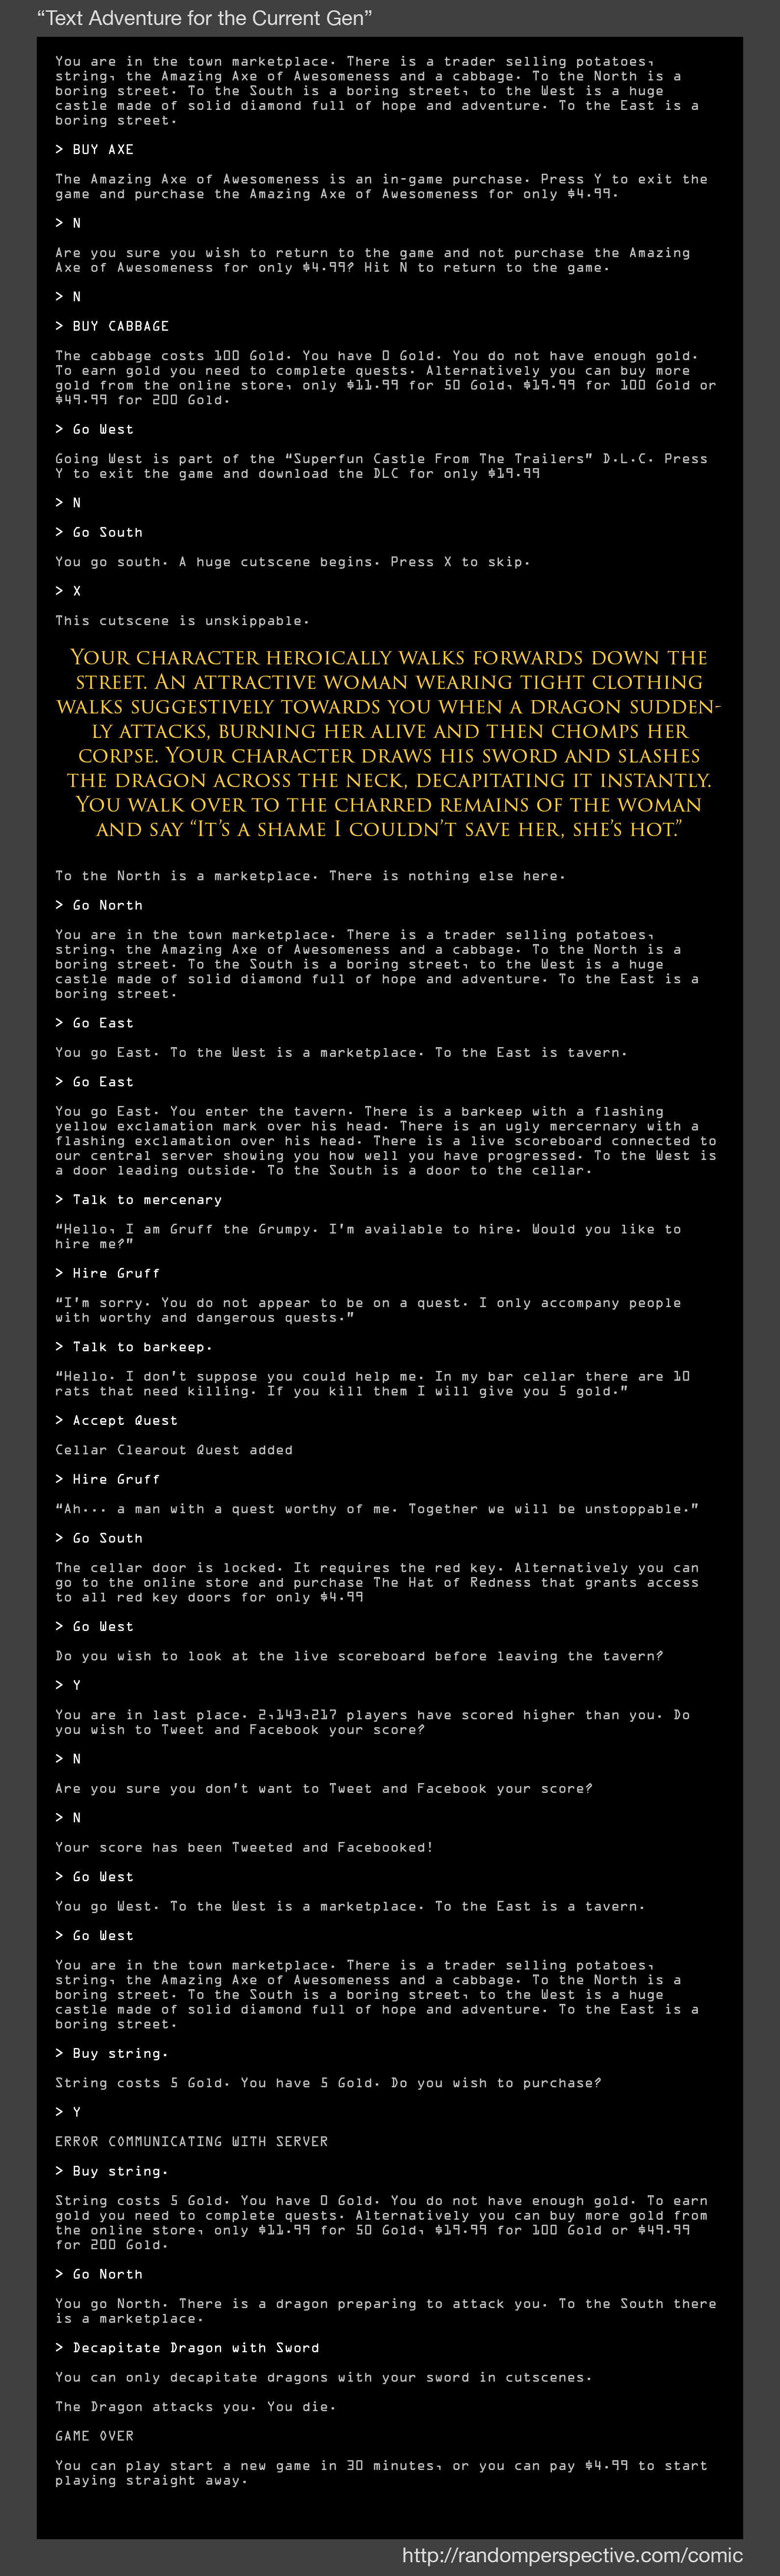 Text Adventure for the Current Gen